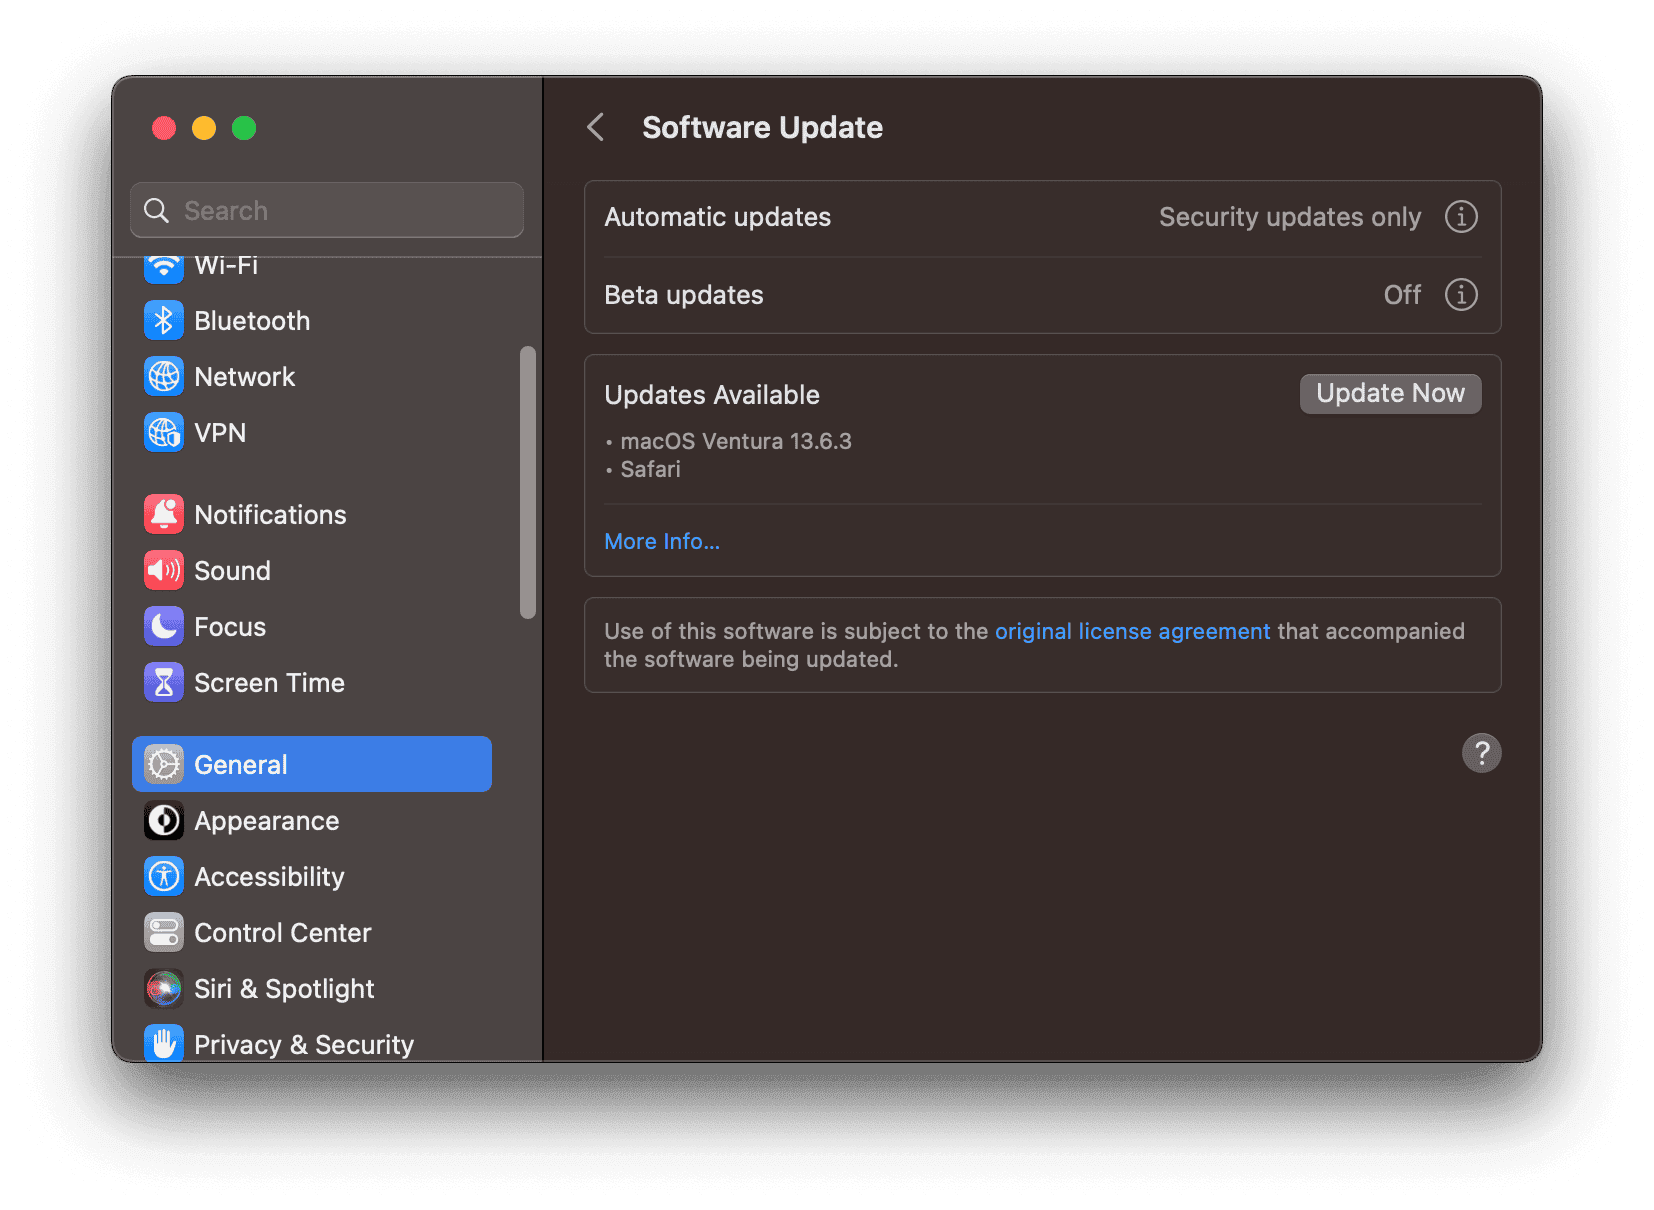 update apps on Mac with macOS Update